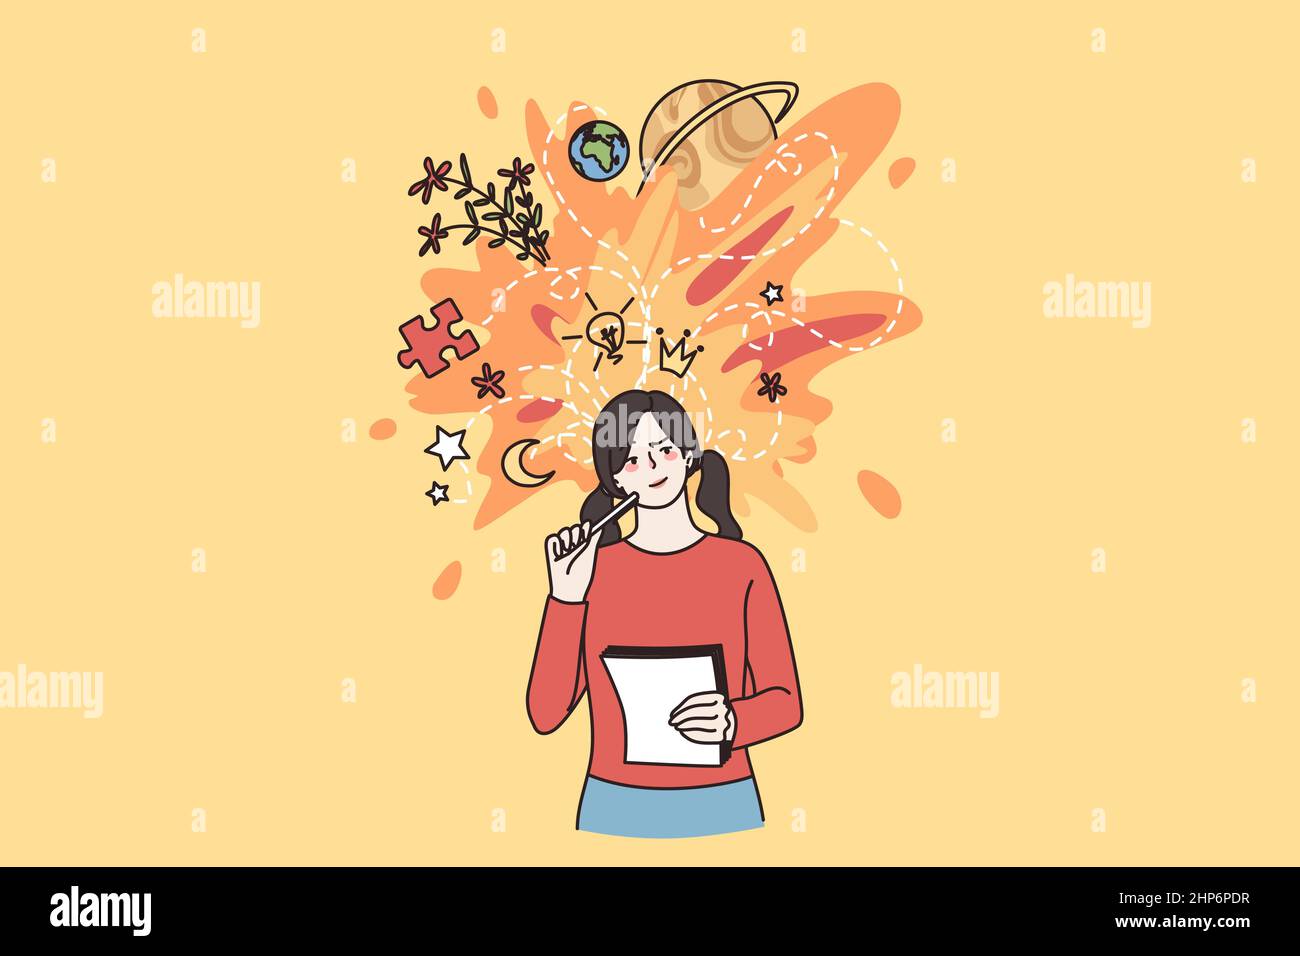 Millennial girl student engaged in creative thinking Stock Vector